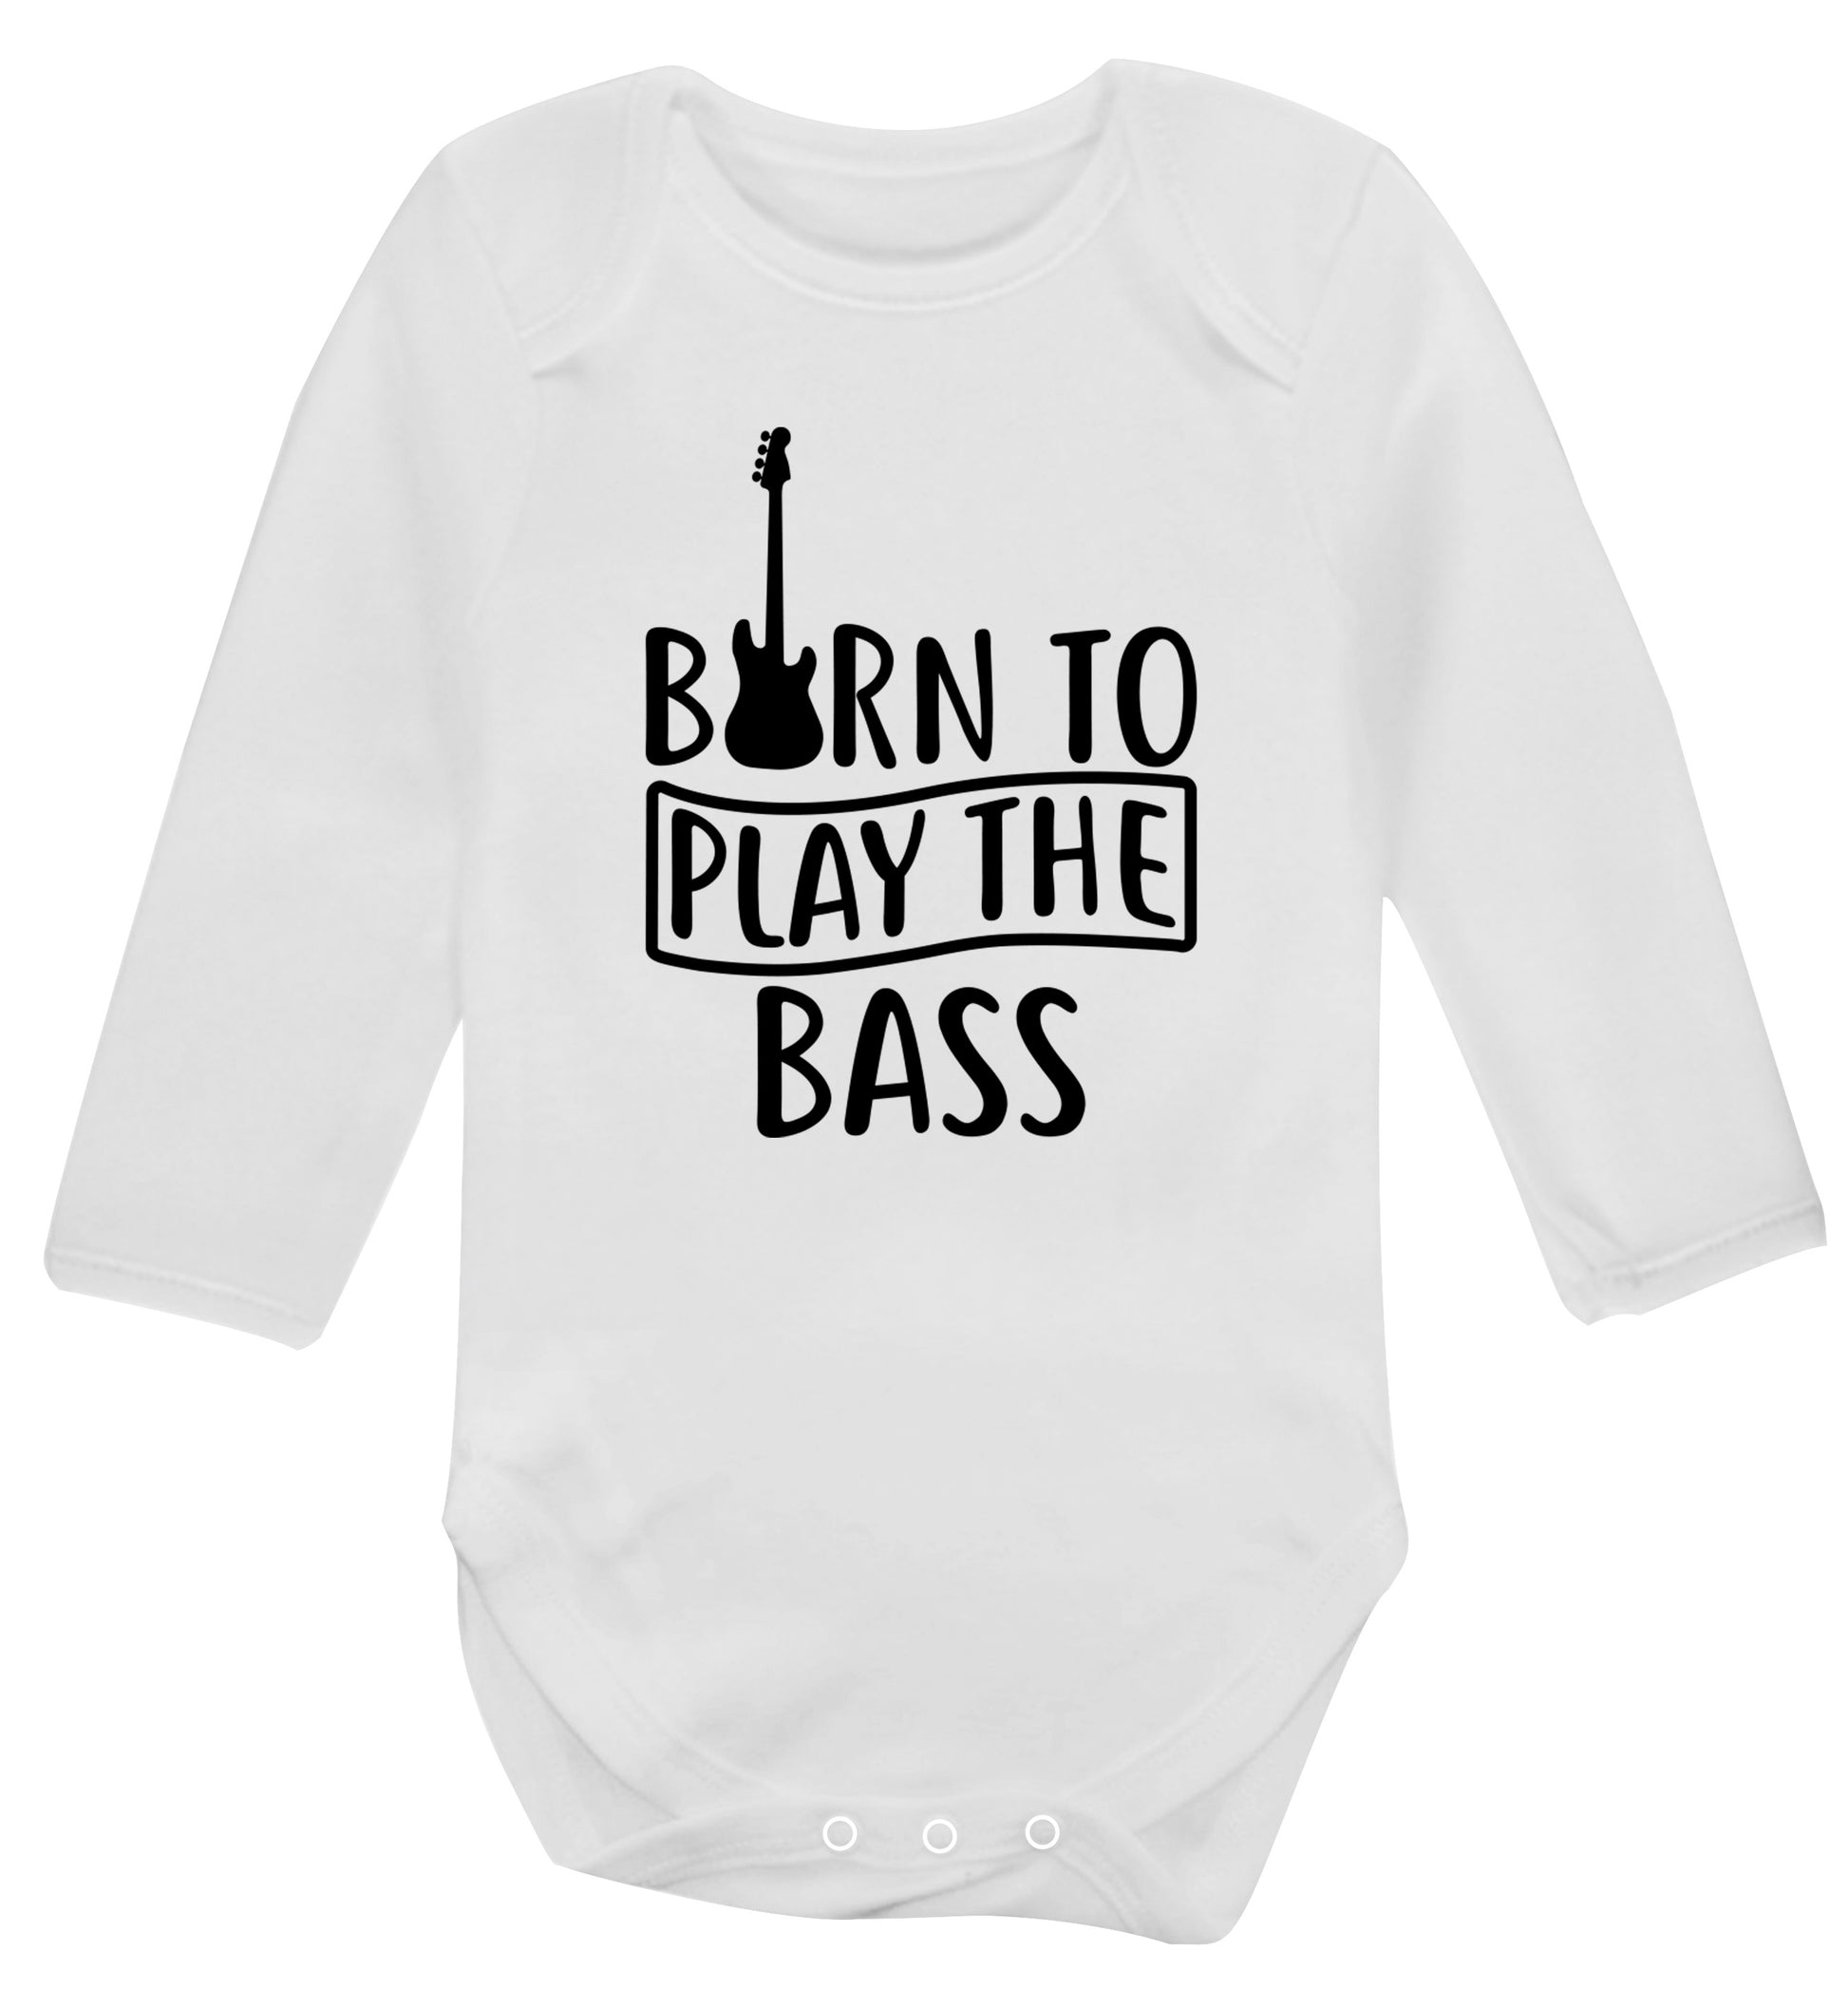 Born to play the bass Baby Vest long sleeved white 6-12 months